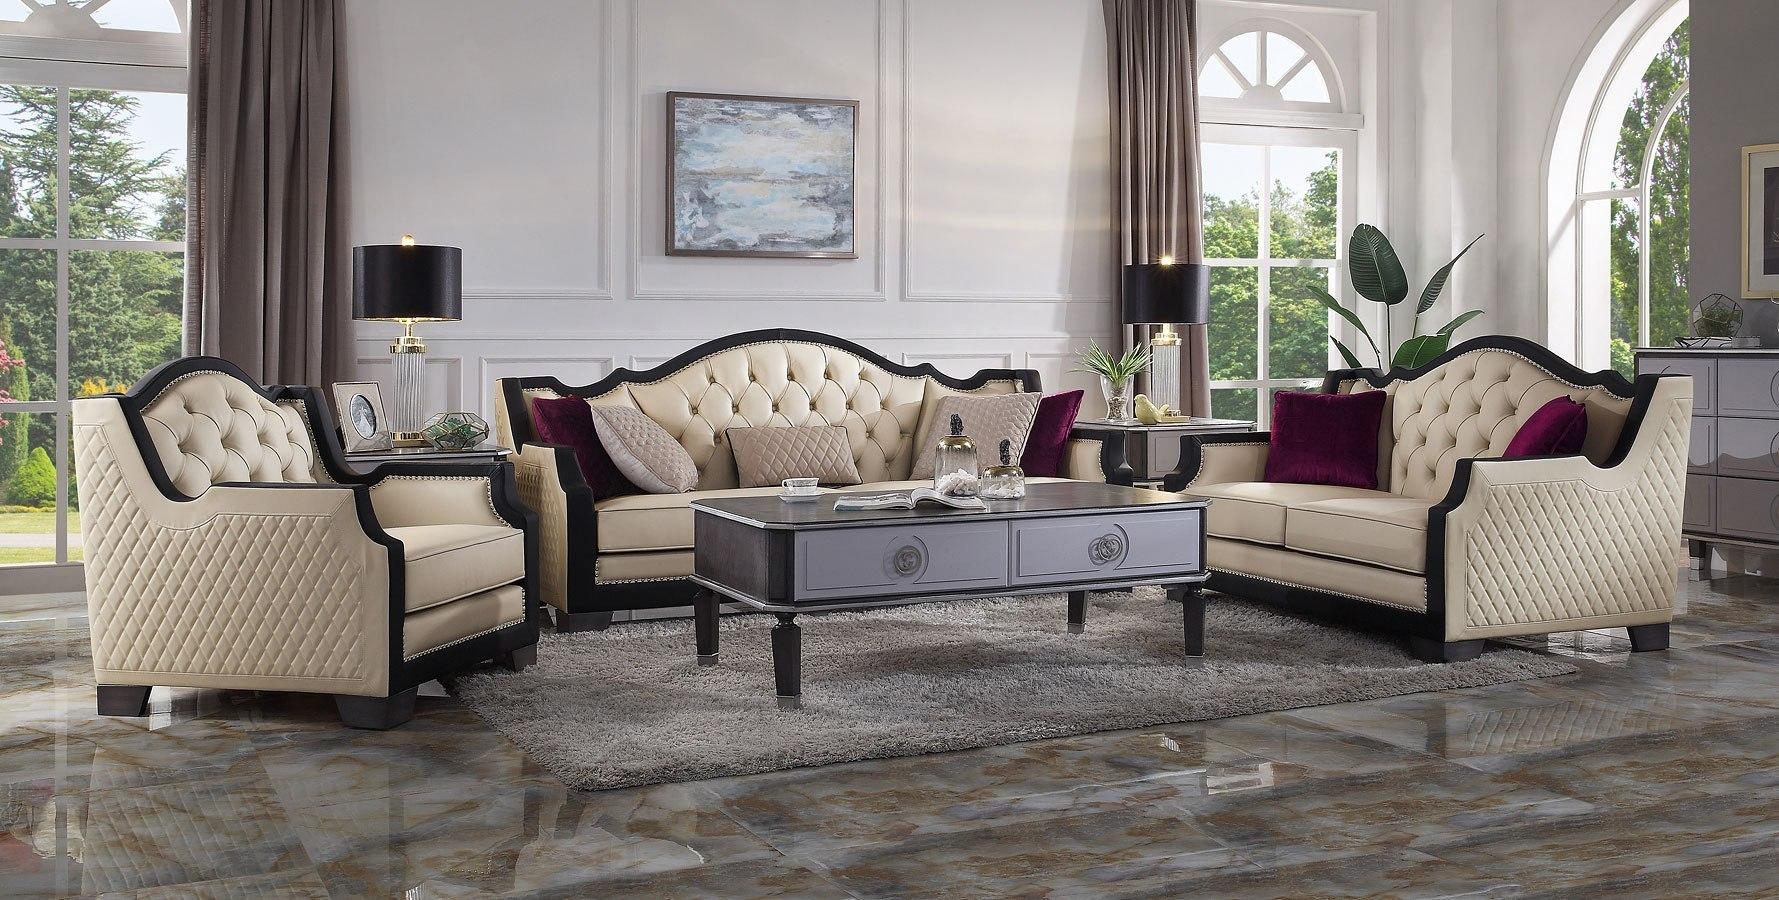 

    
Transitional Beige Living Room Set by Acme House Beatrice 58810-4pcs
